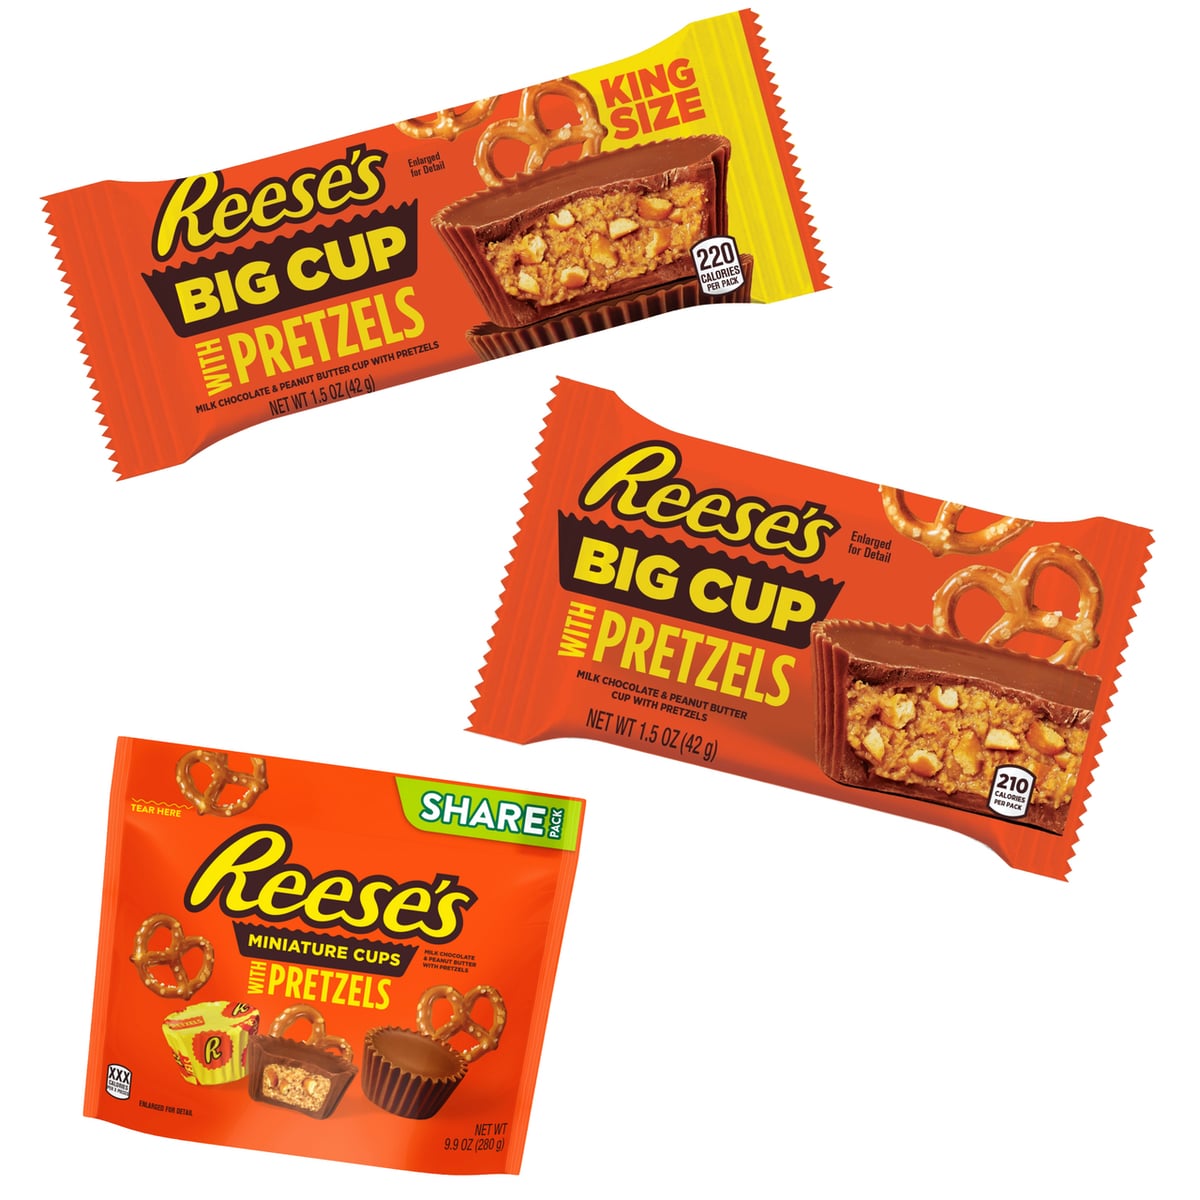 REVIEW: Reese's Caramel Big Cup - The Impulsive Buy